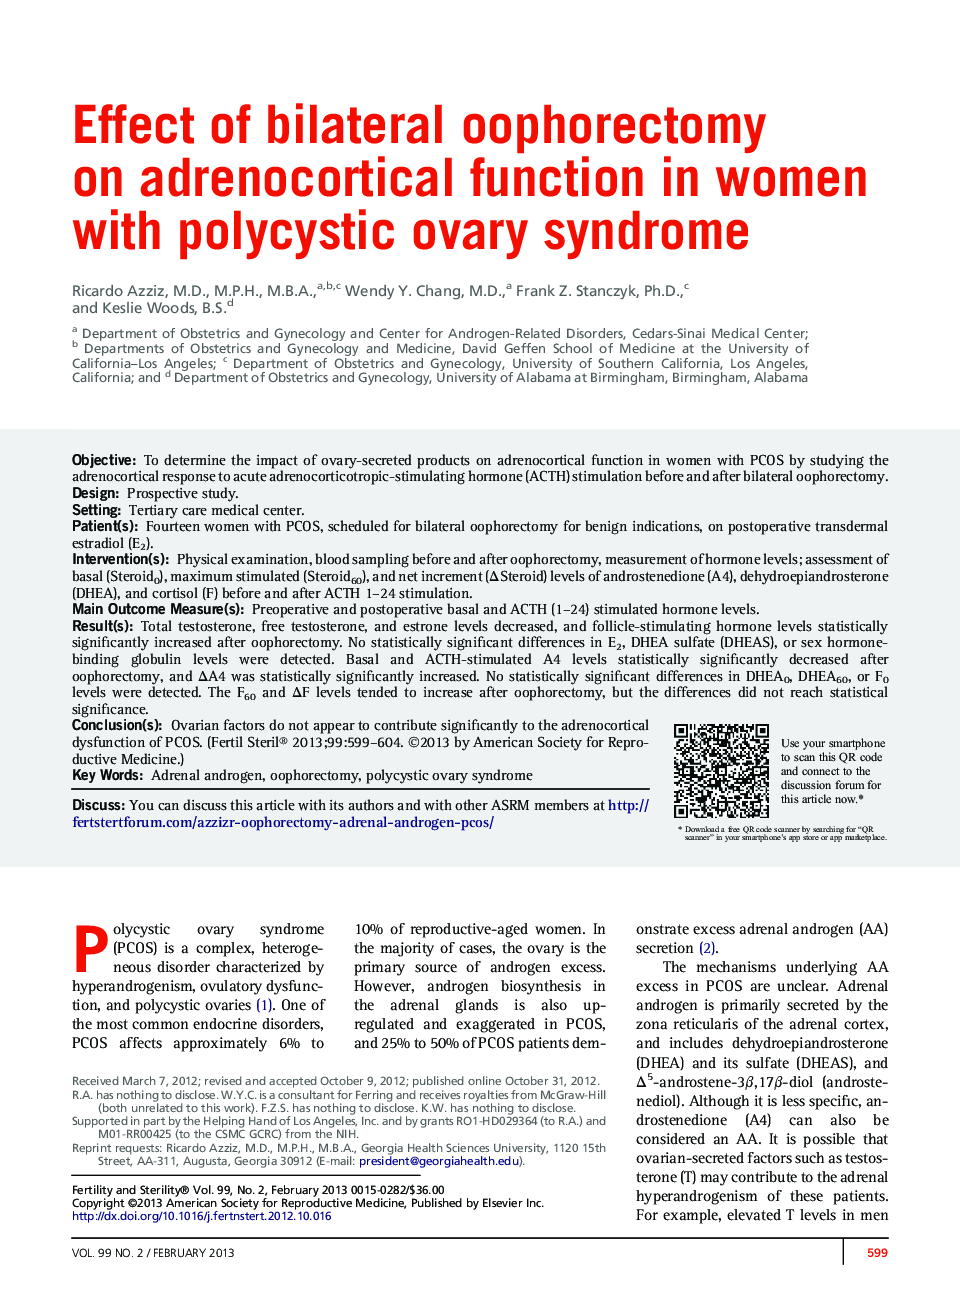 Effect of bilateral oophorectomy on adrenocortical function in women with polycystic ovary syndrome 